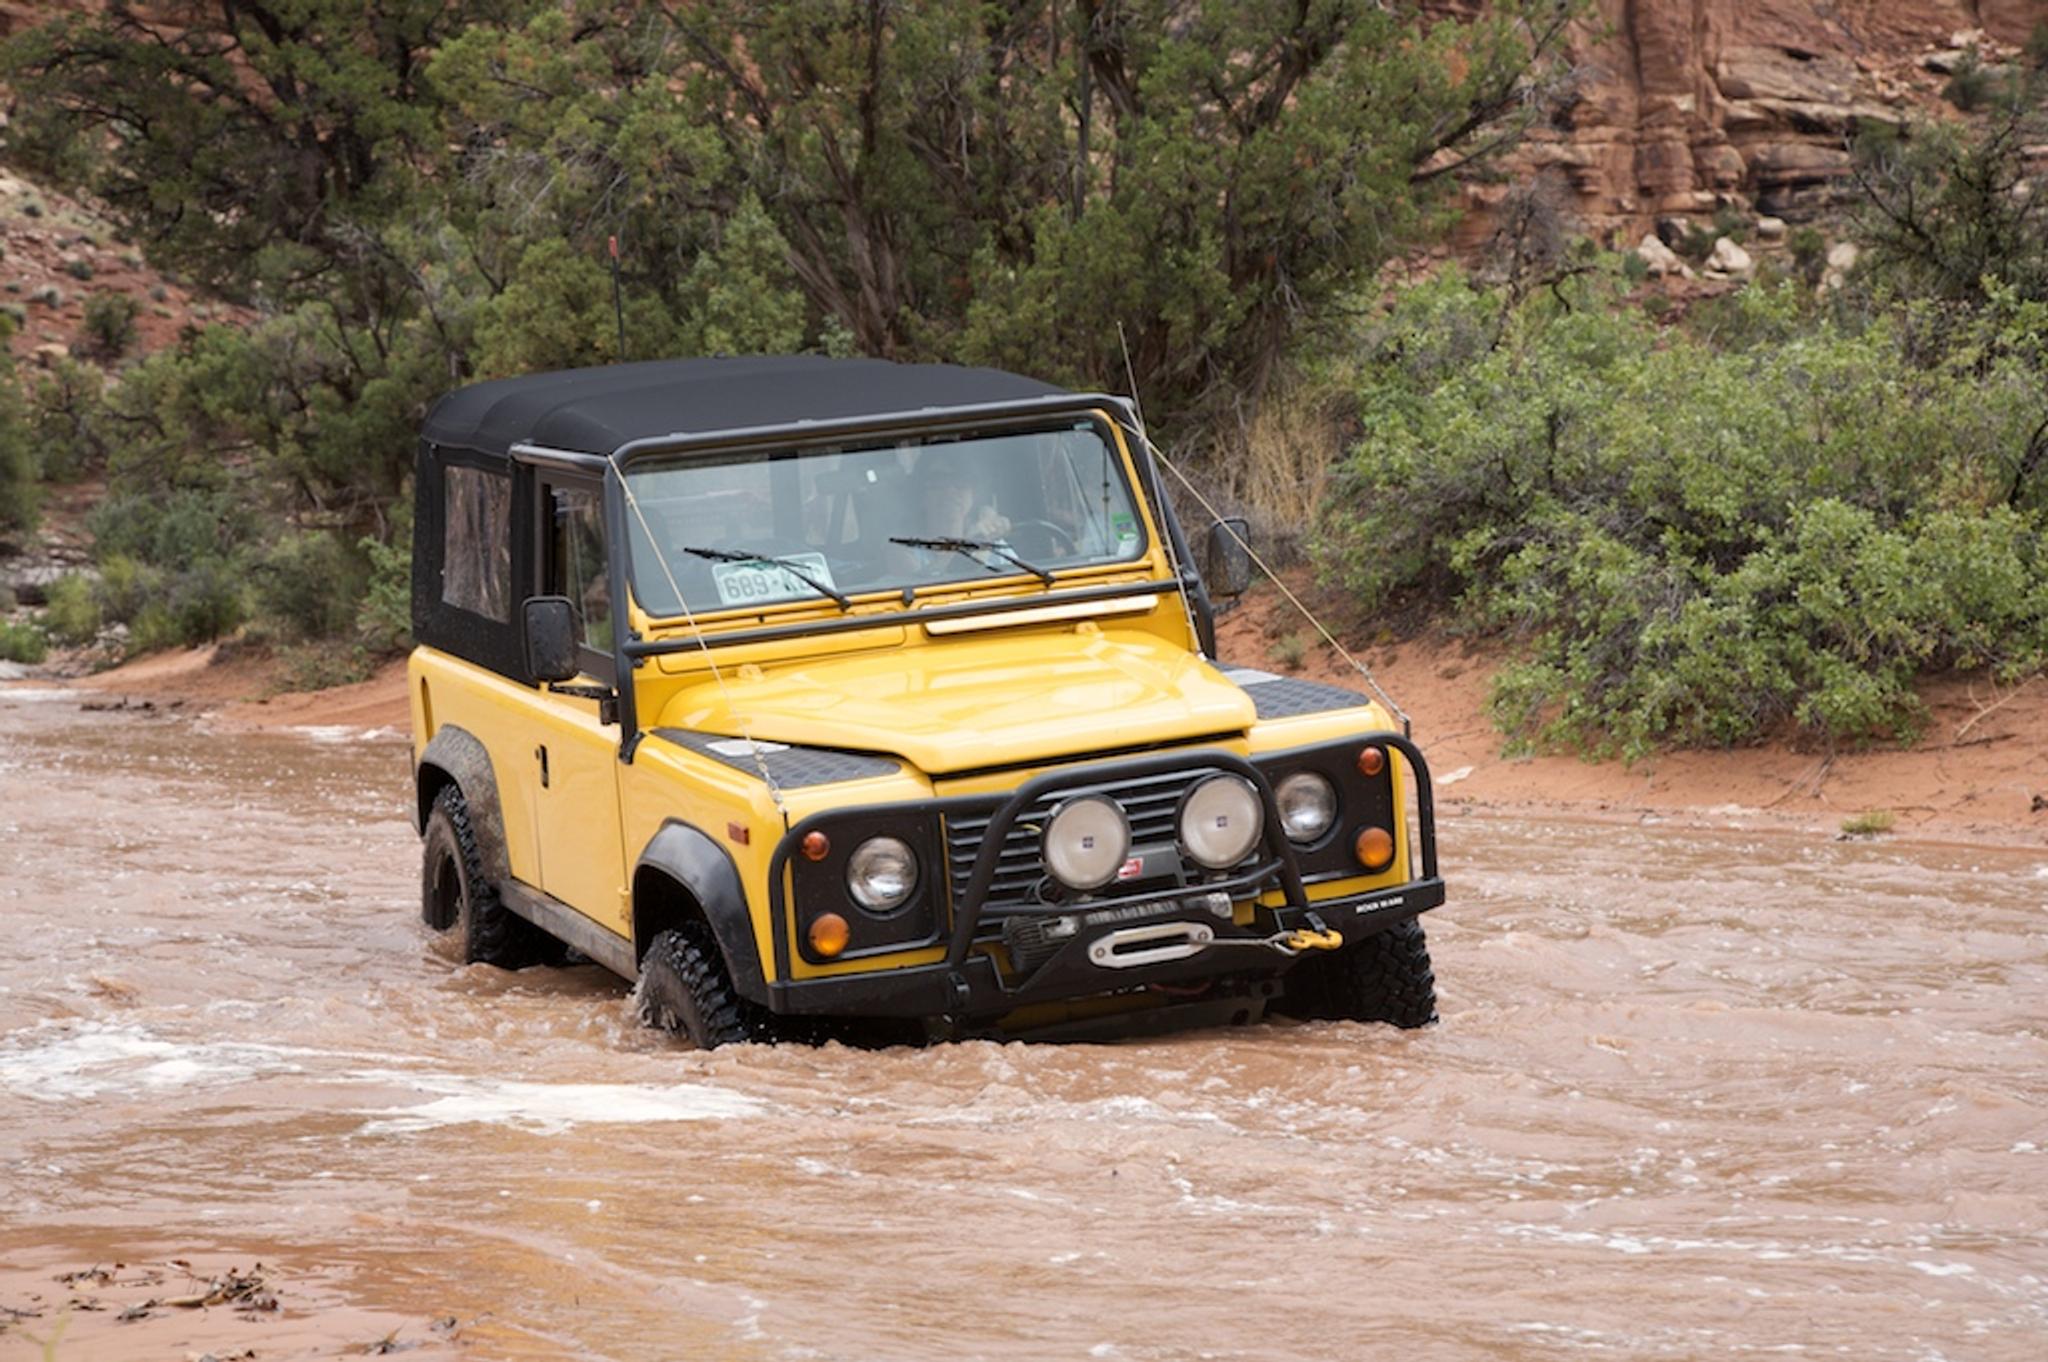 Land Rover defender, rover crossing a river, yellow car driving in rough terrain